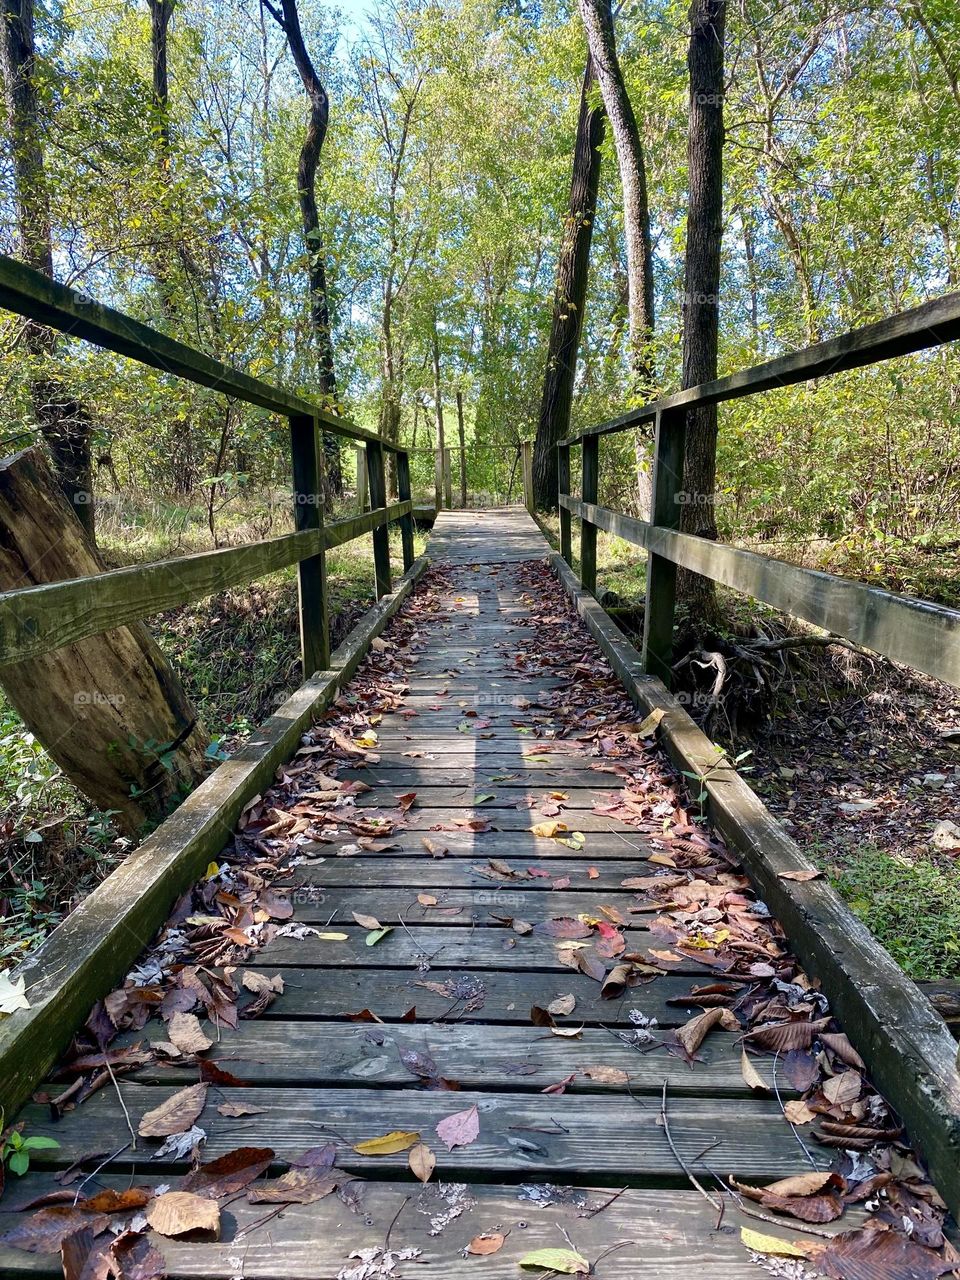 A wooden bridge covered in fallen leaves in the woods